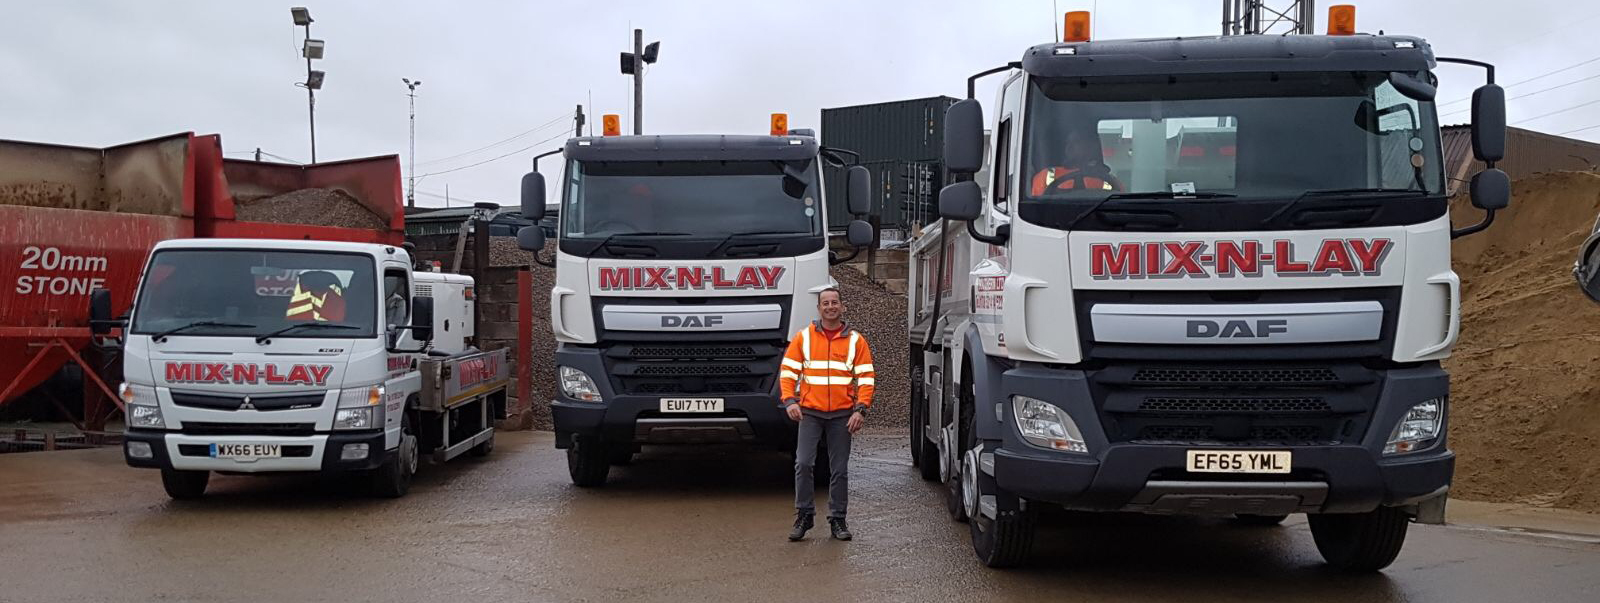 Mix N Lay | Concrete Supplier Company | Trusted Concrete Suppliers Located in Rainham